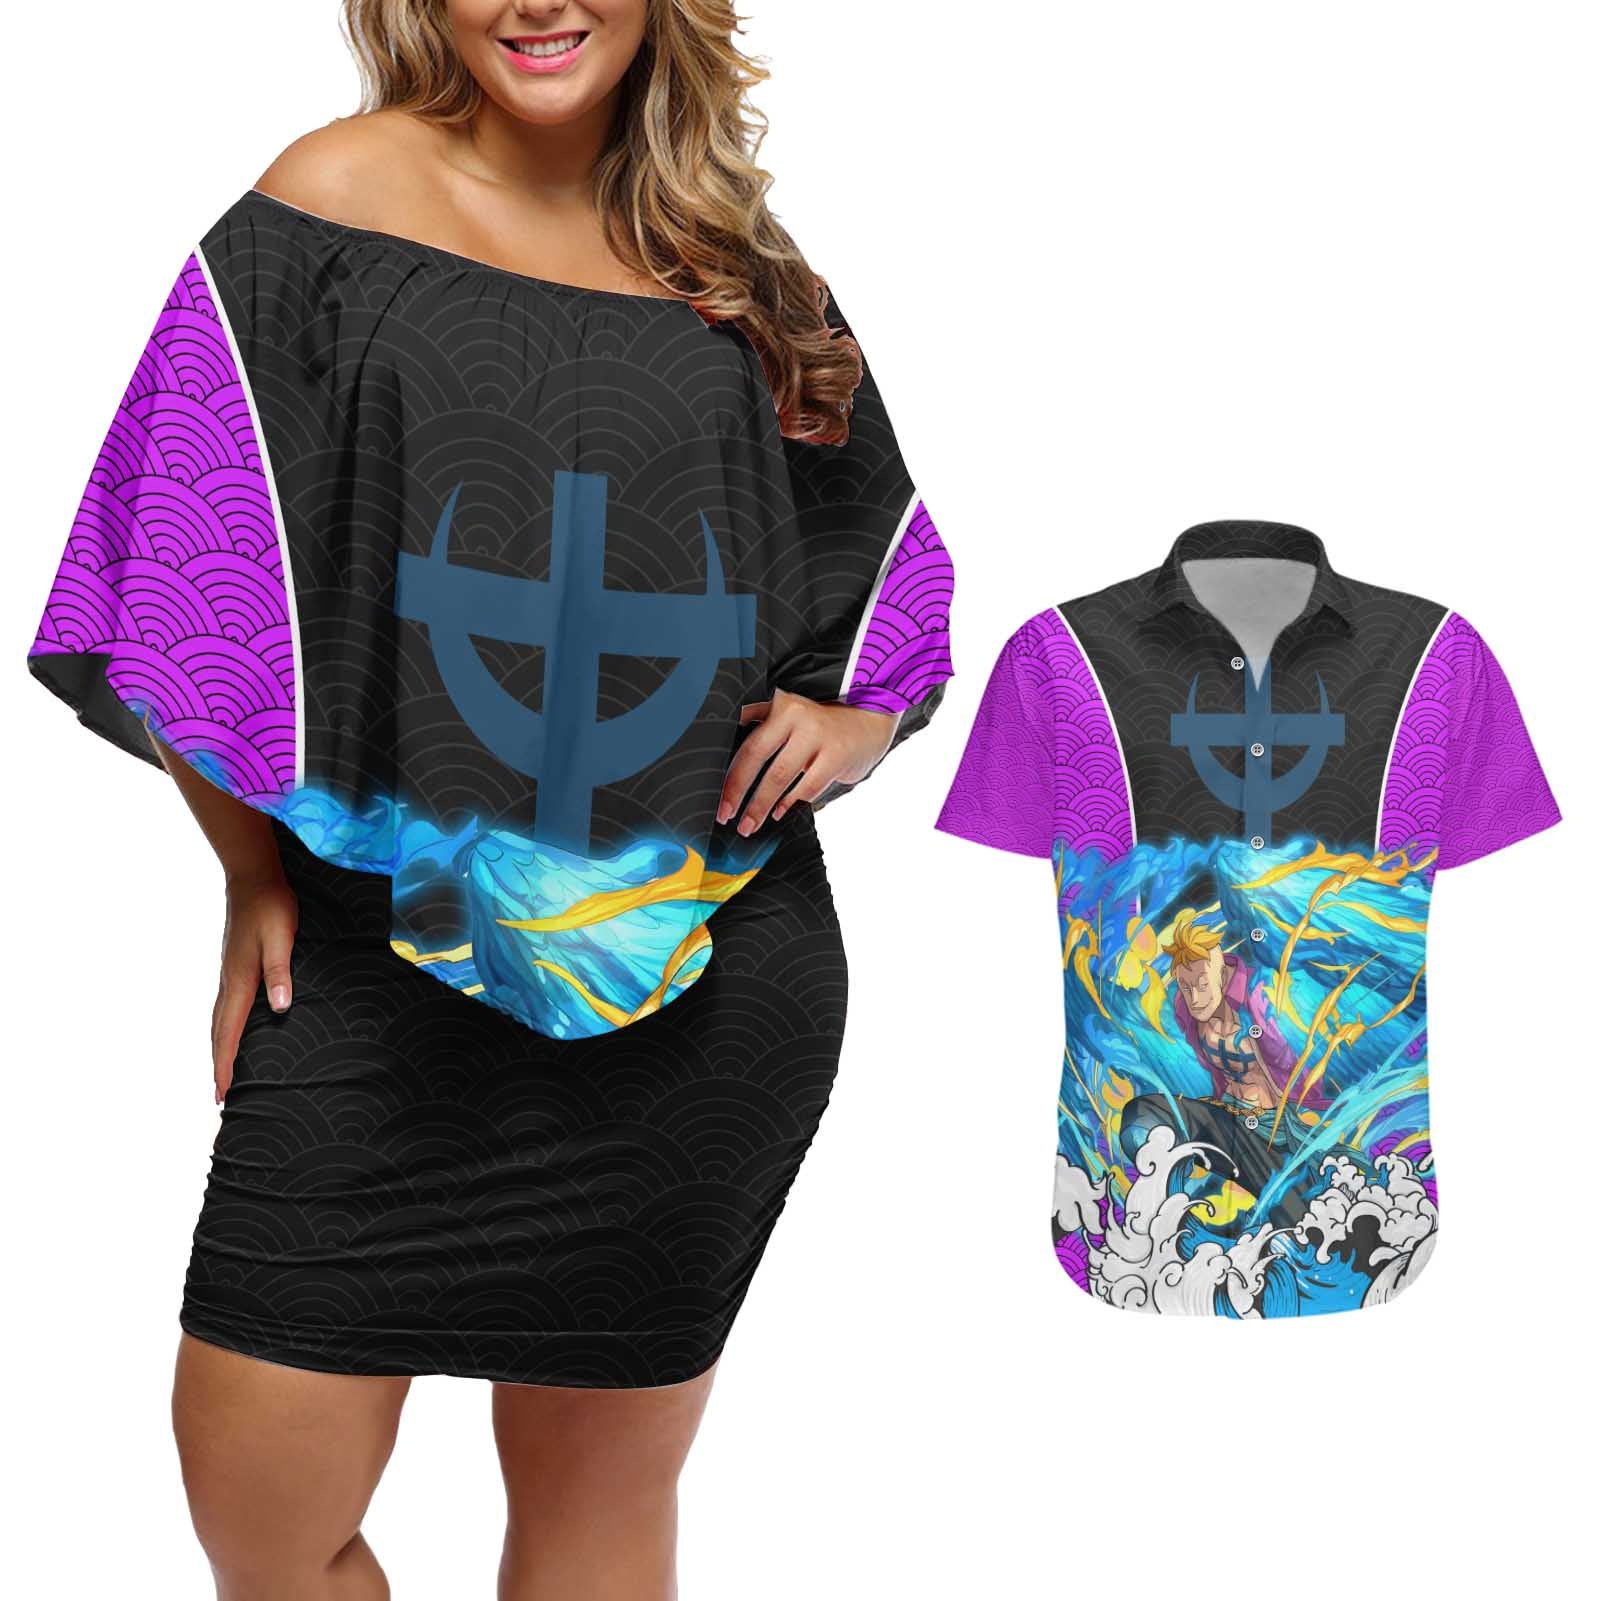 Marco - One Piece Couples Matching Off Shoulder Short Dress and Hawaiian Shirt Anime Style